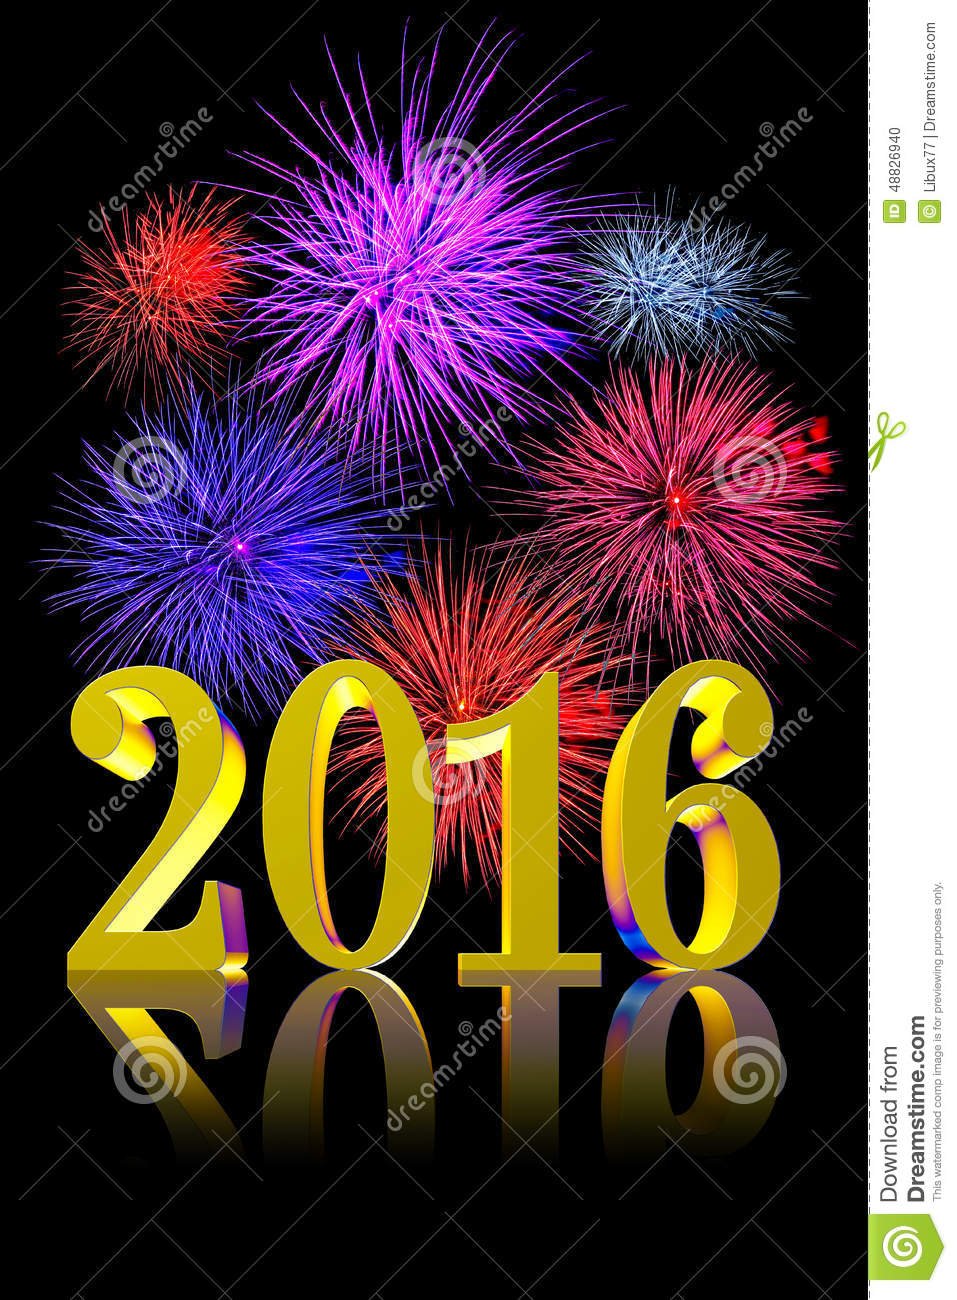 3d Text New Year 2015 On Black Background With Real Fireworks For New